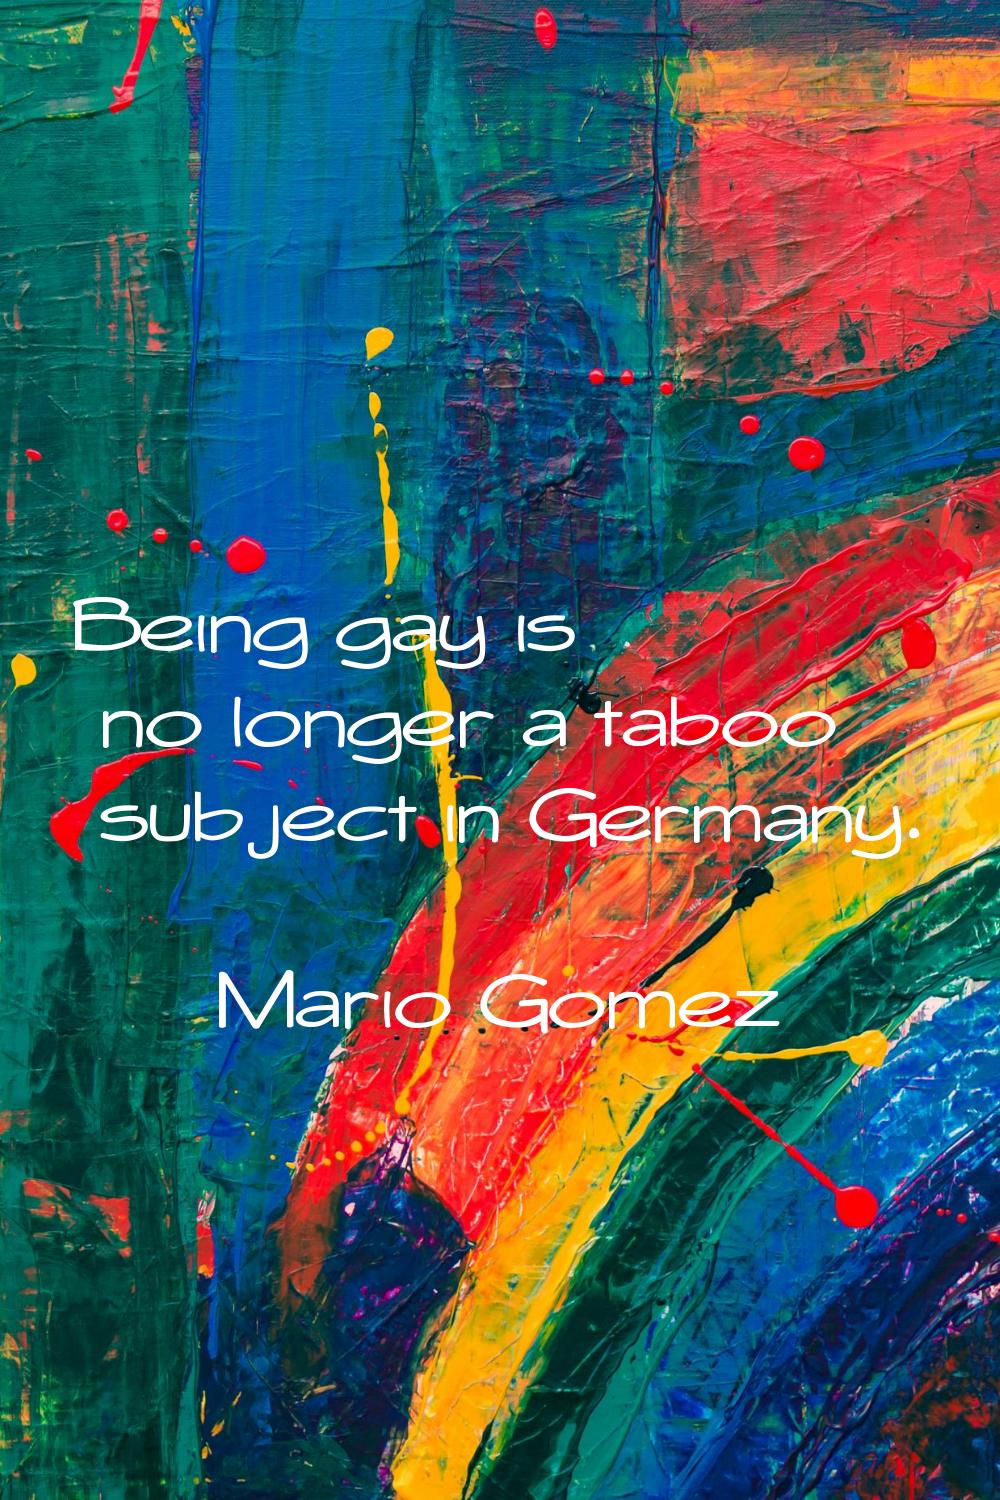 Being gay is no longer a taboo subject in Germany.